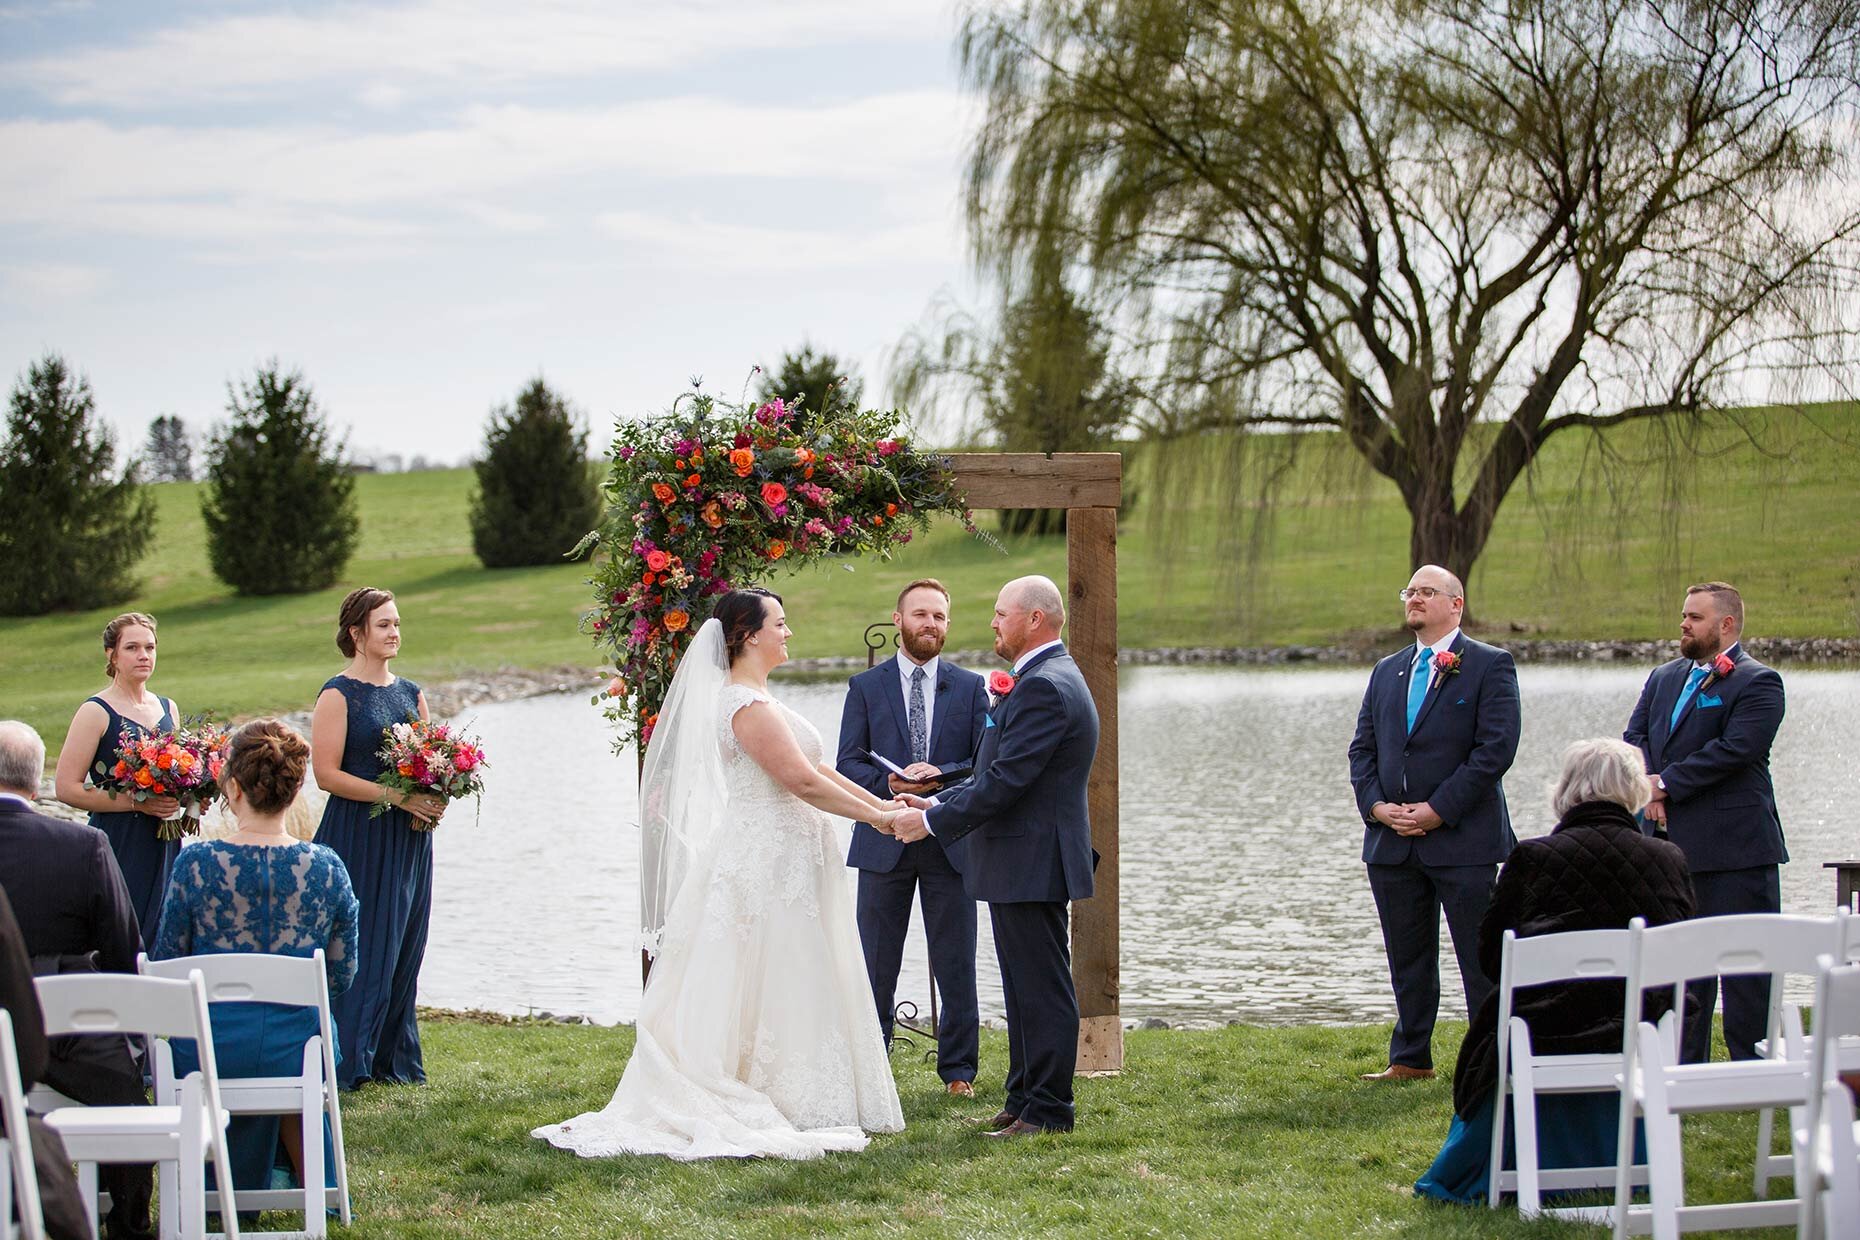  Bride, Groom Outdoor, Ceremony, Wedding, Blue Skies, Lancaster, PA, Manheim, PA, Central, PA, Lakefield Weddings, Barn Wedding, Farm Wedding, Rural, Outdoors, Willow Tree, Vows, Married, Wedding Party, Guests 